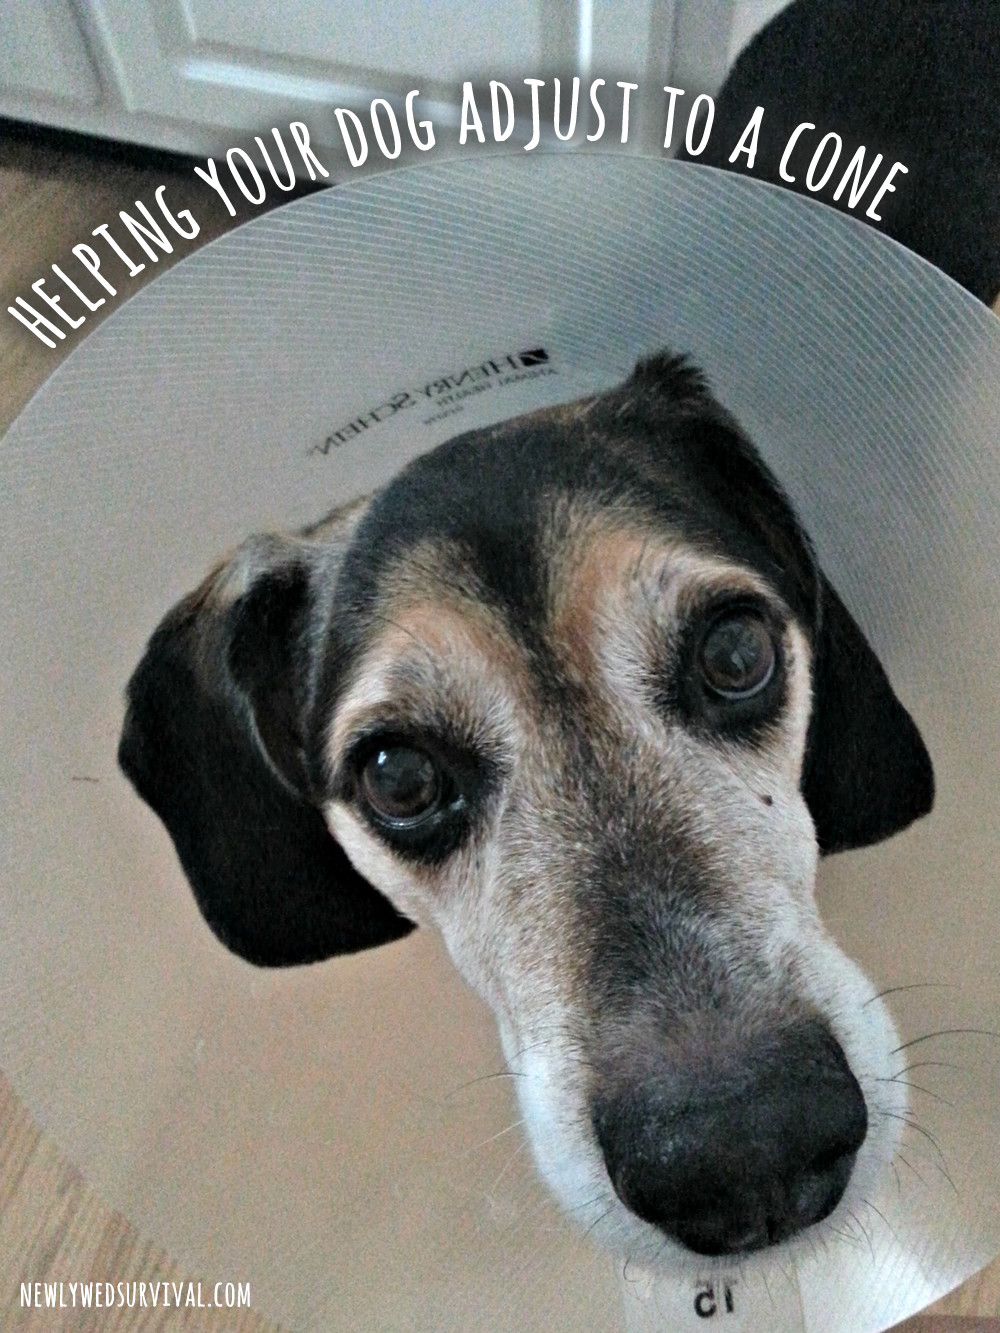 DIY Dog Cone Collar
 How to Help Your Dog Adjust to a Cone Collar BrightMind